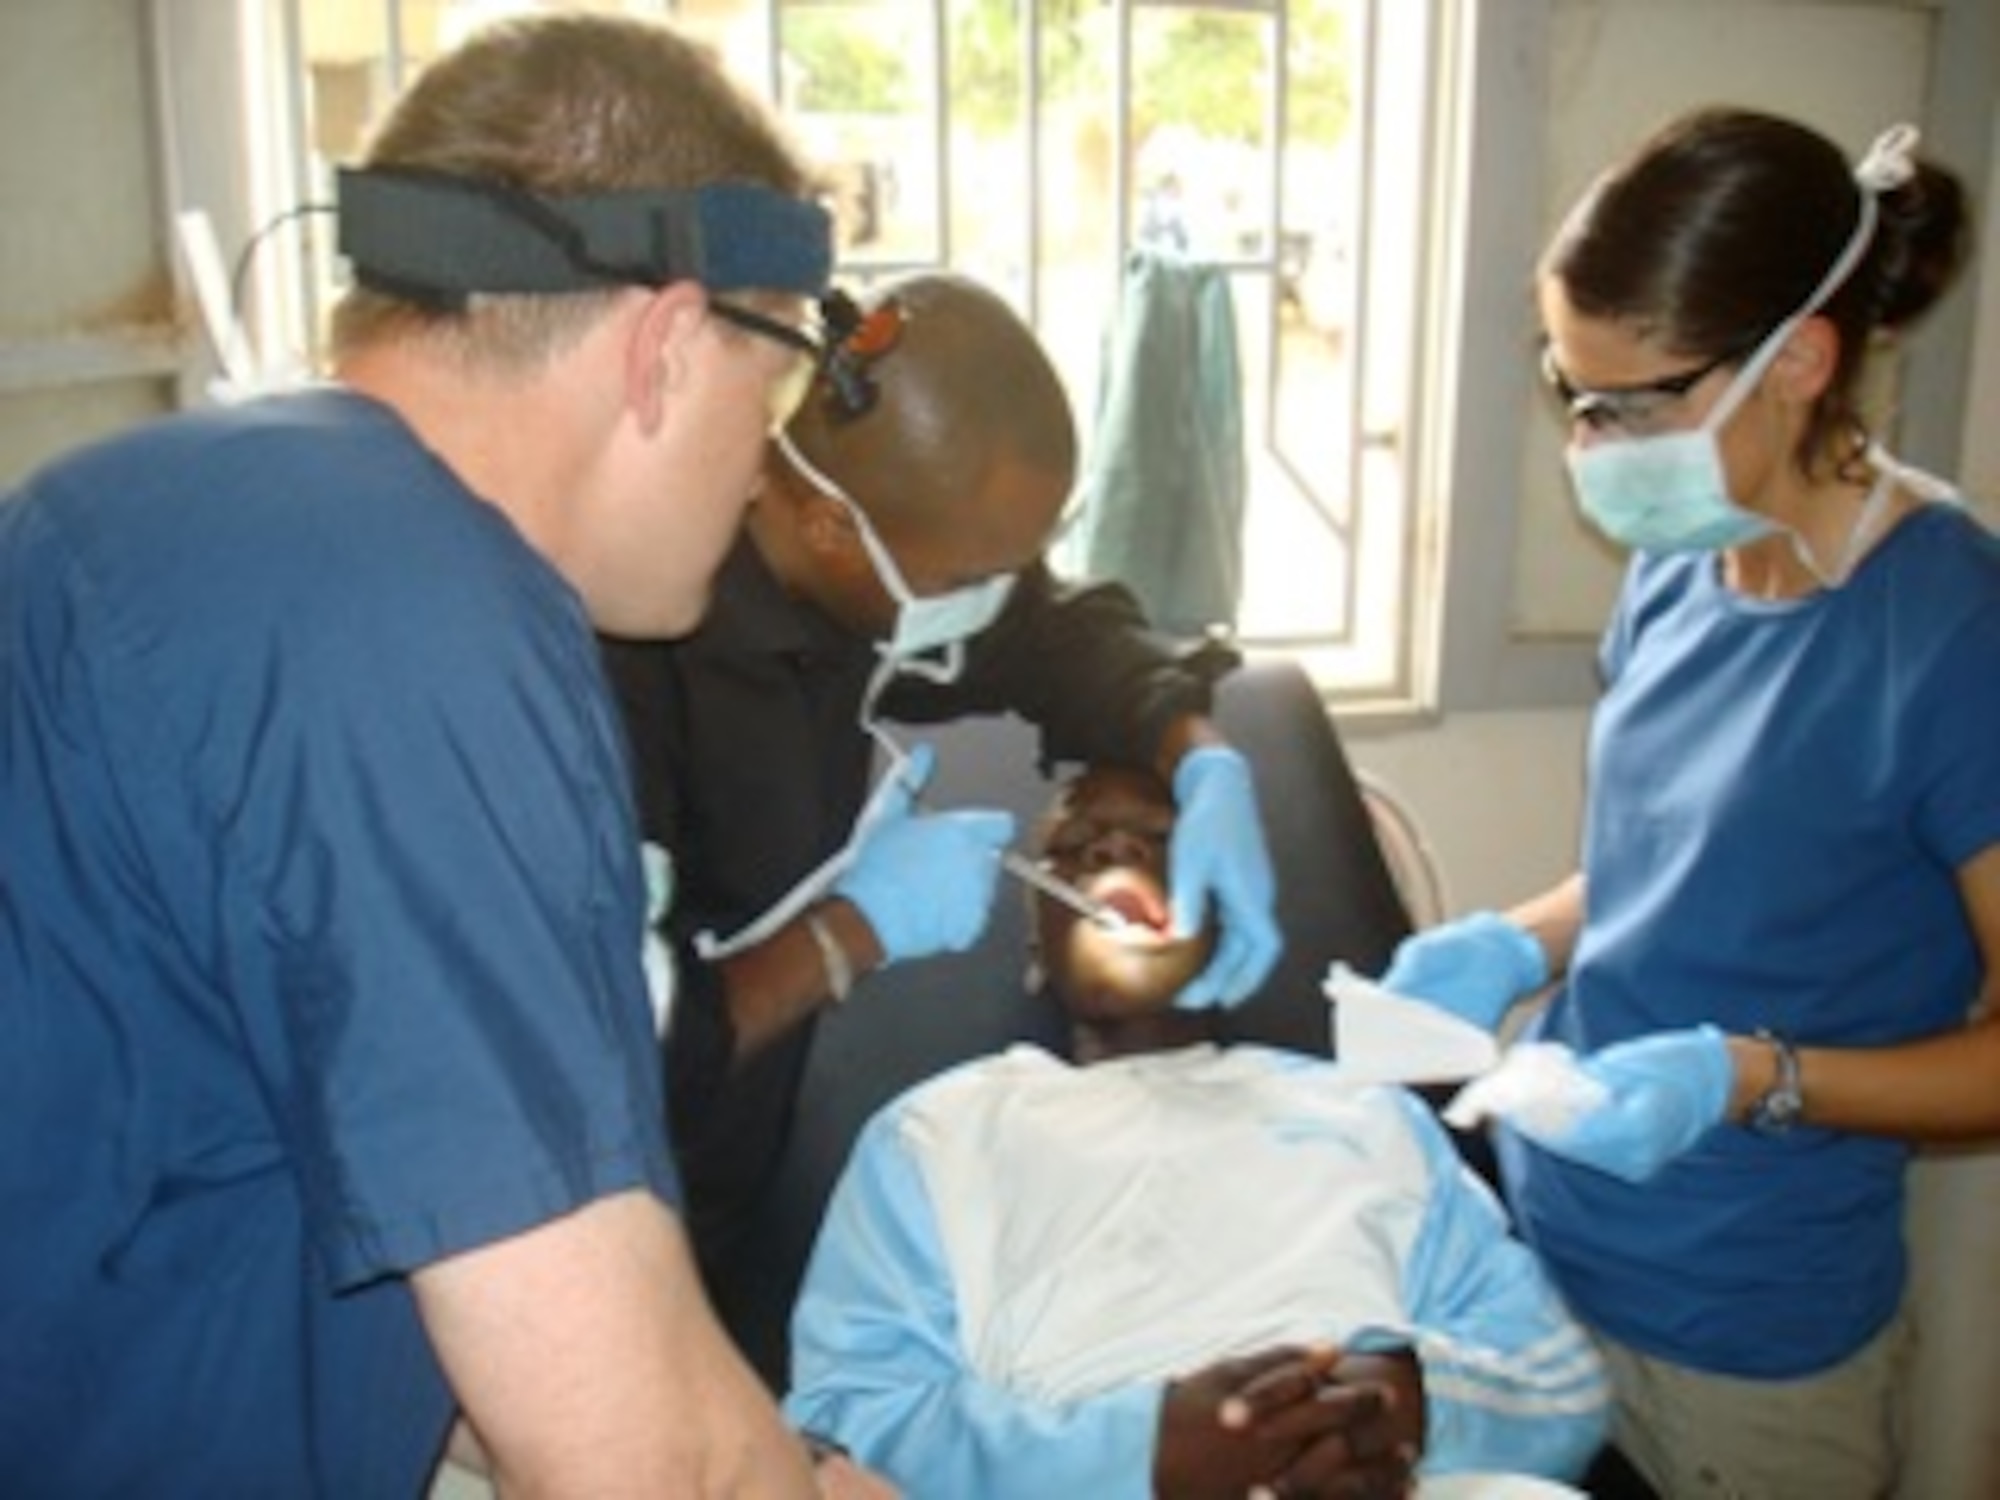 Captain Tad Tholstrom (far left) and Staff Sgt. Leah Potter (far right), 1st Special Operations Medical Group dentist and dental technician, operate alongside a local dentist while treating a patient in West Africa.  The Hurlburt Airmen were temporarily assigned to the West Africa region in support of Exercise Flintlock, an annual exercise  that focuses on improving interoperability between the militaries of the United States, Europe and Northern and Western African countries.(courtesy photo)